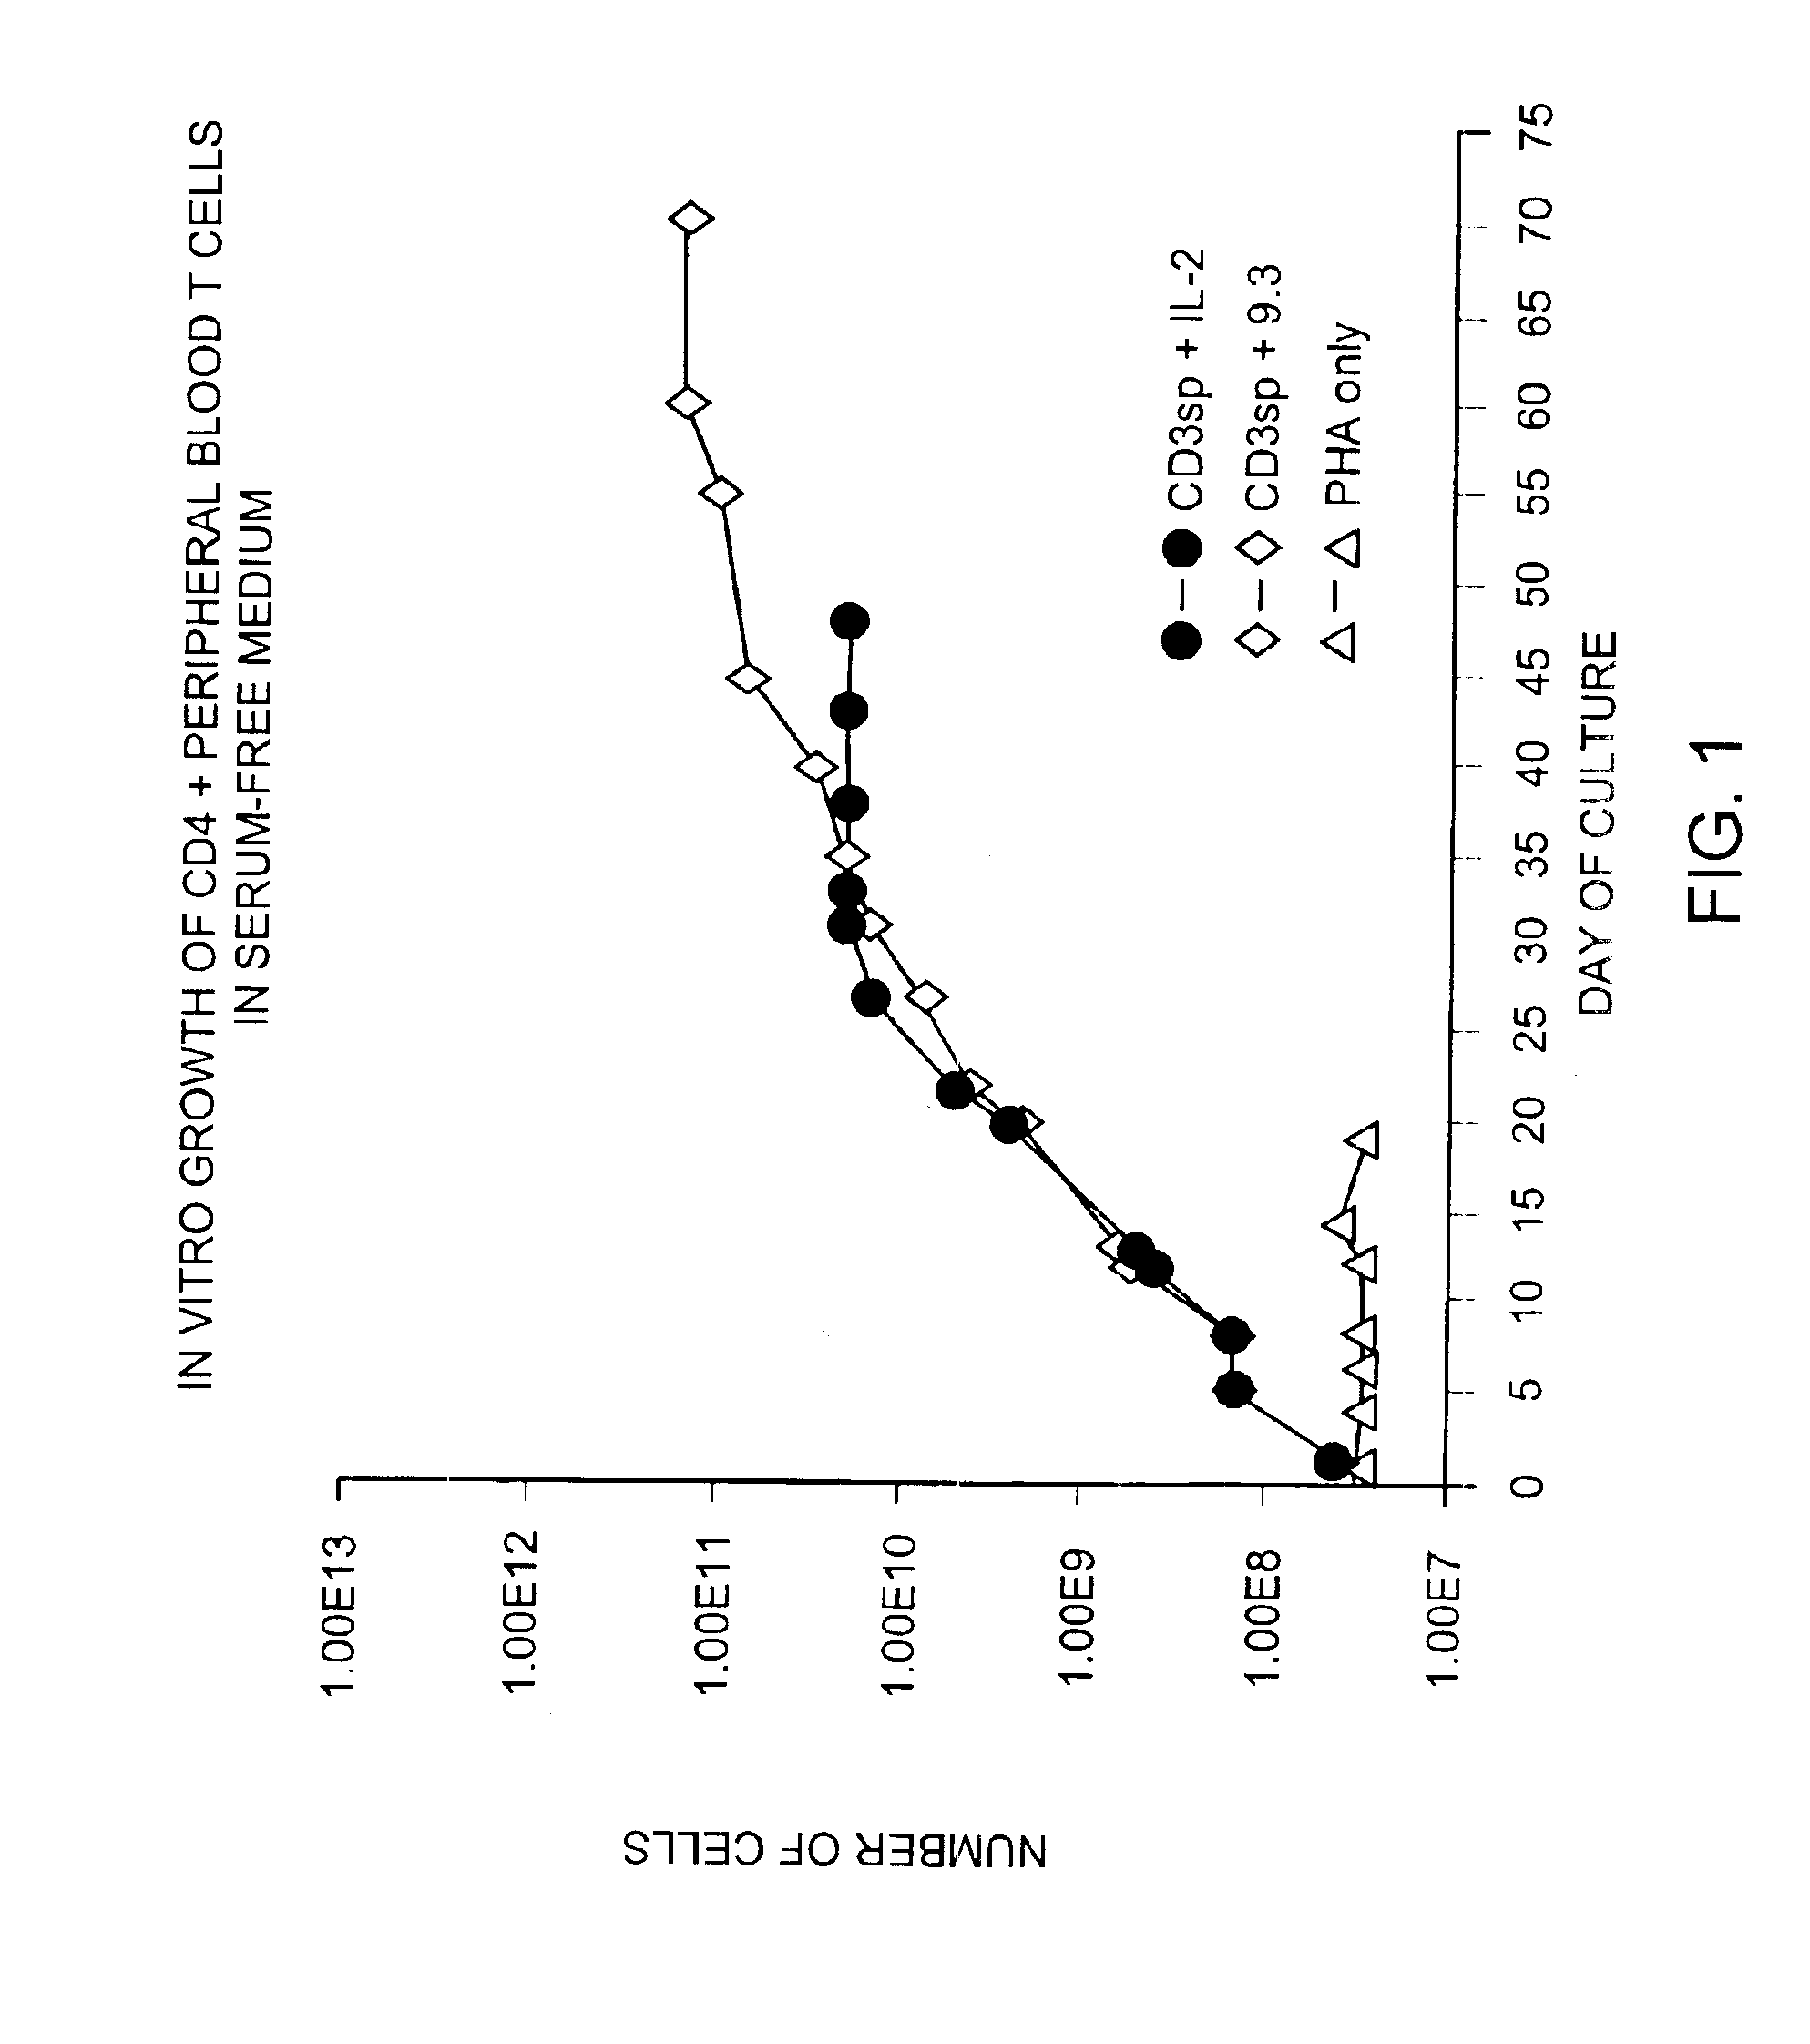 Methods for selectively stimulating proliferation of T cells